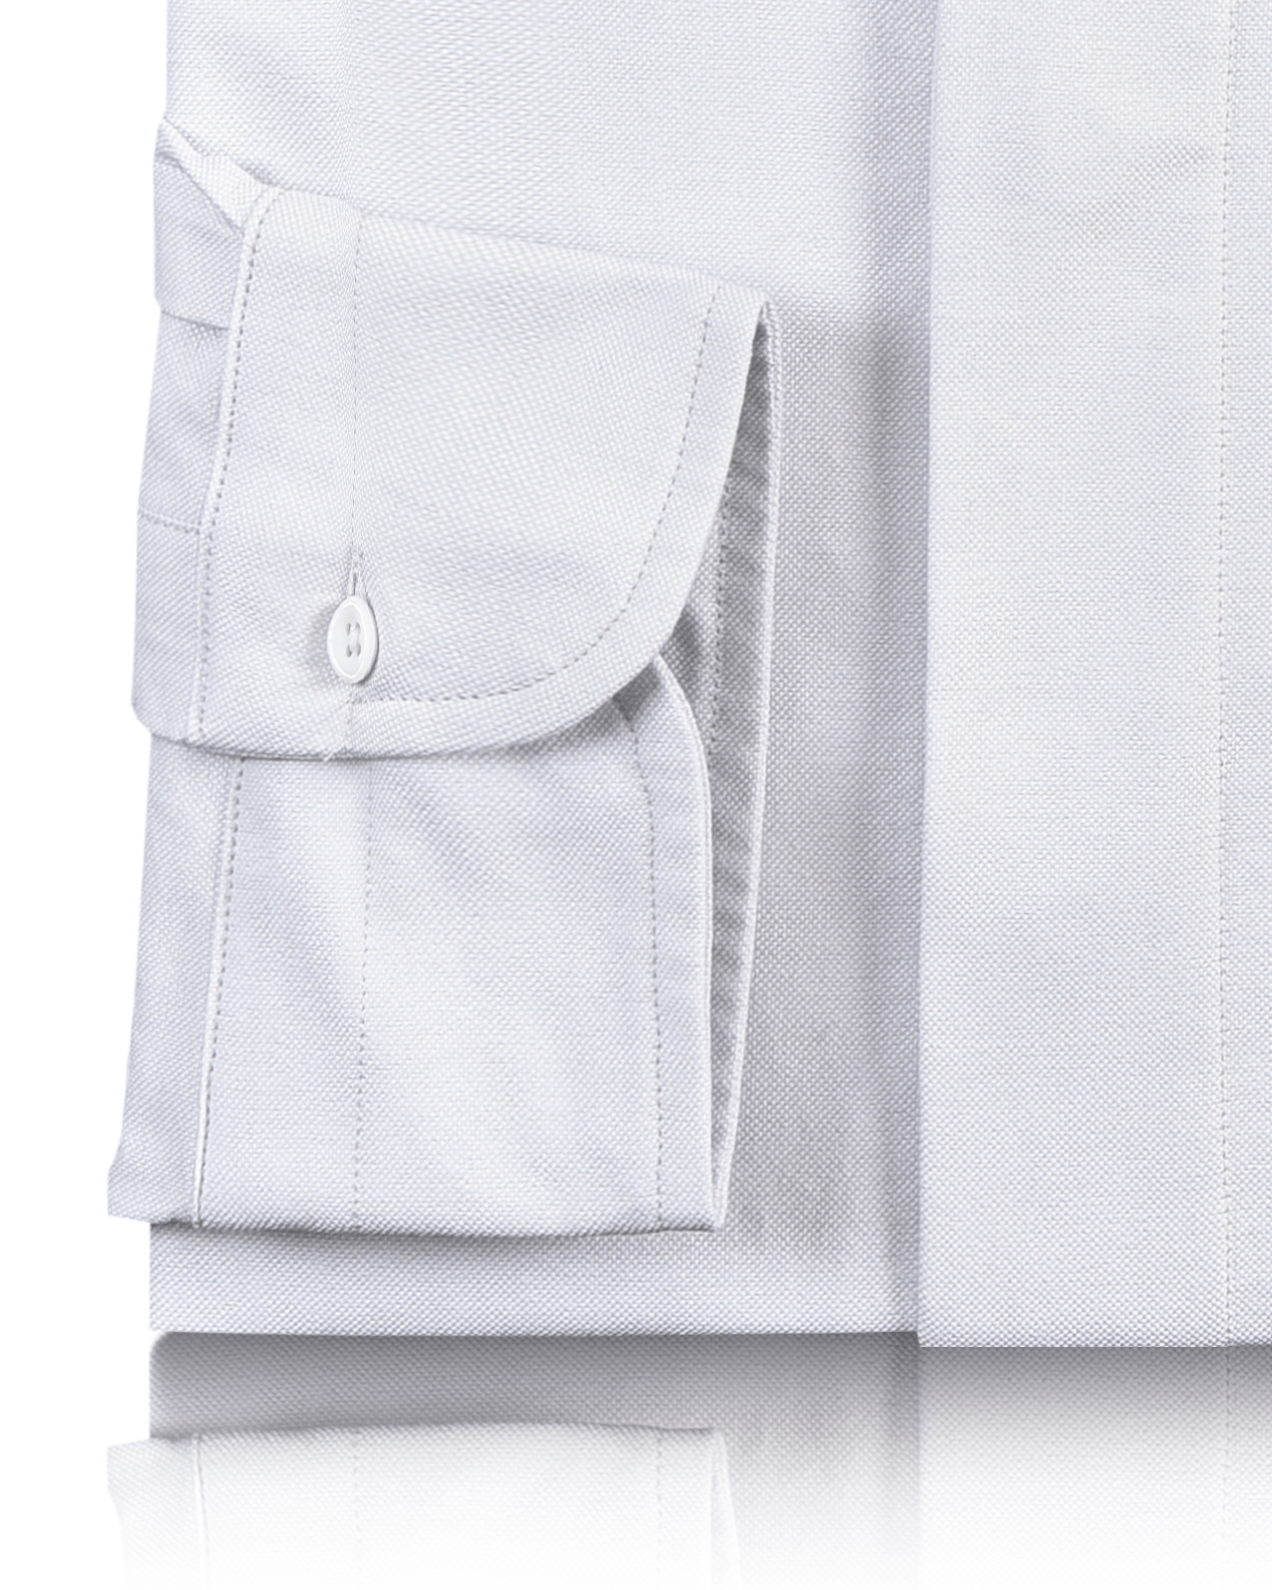 Cuff of the custom oxford shirt for men by Luxire in milky white